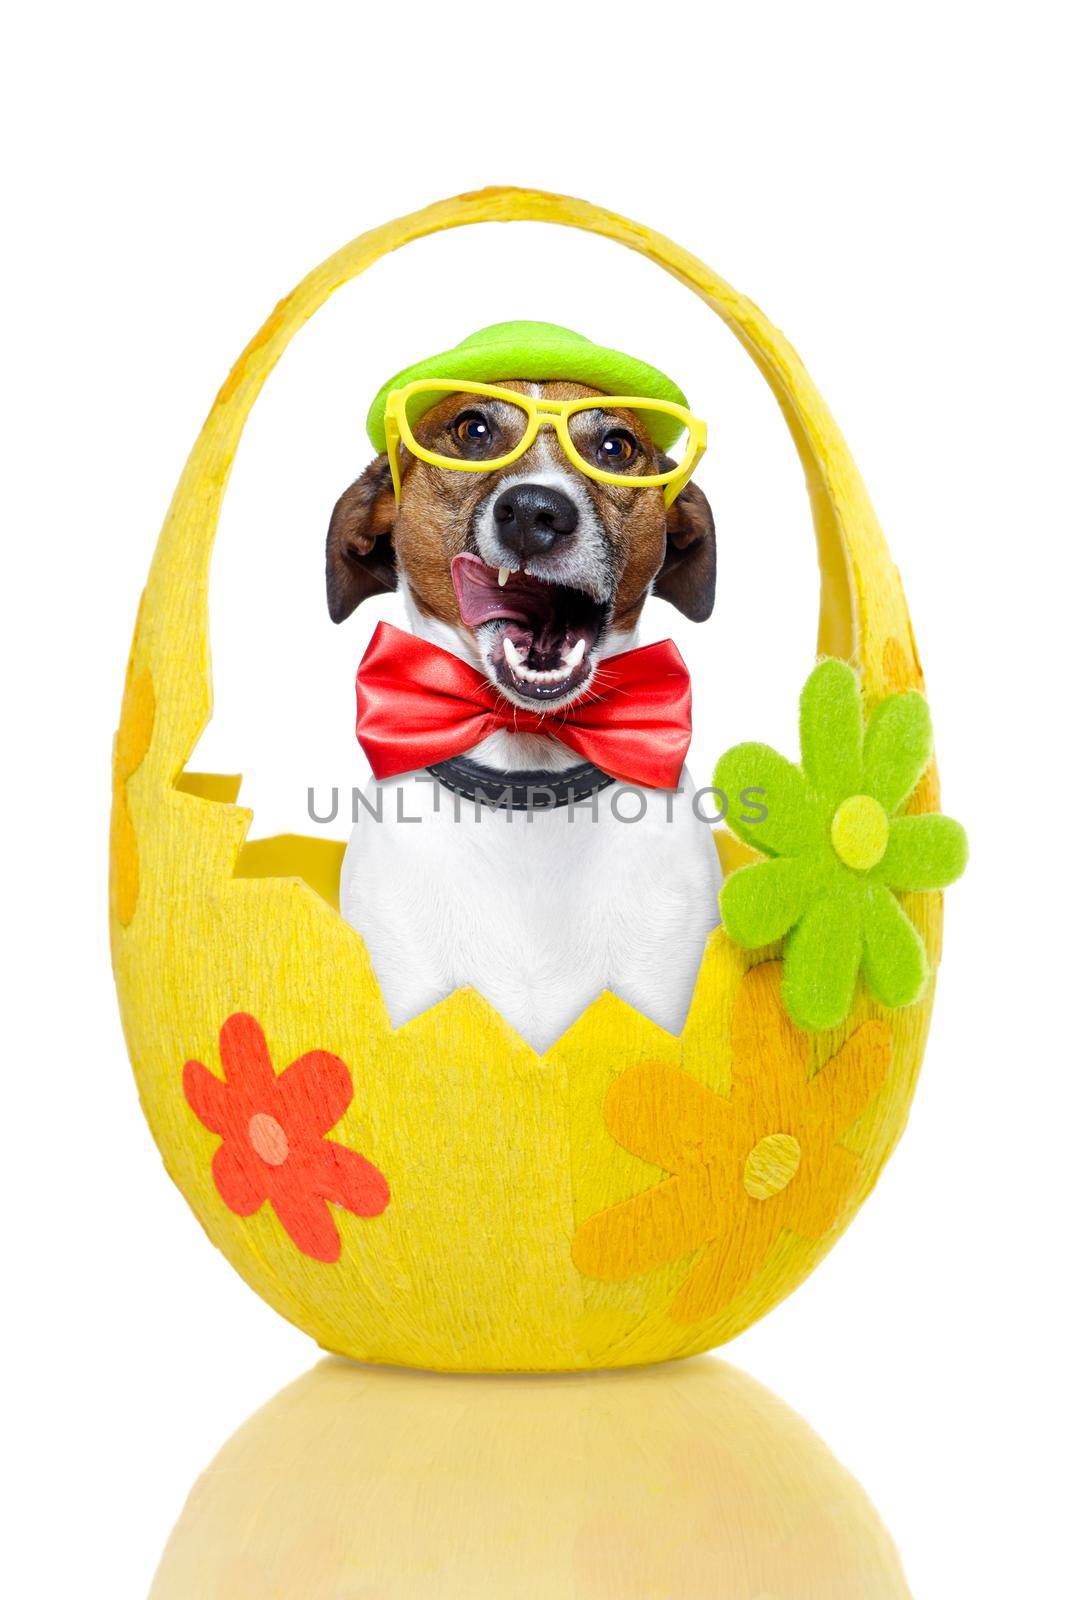 dog in colorful easter egg